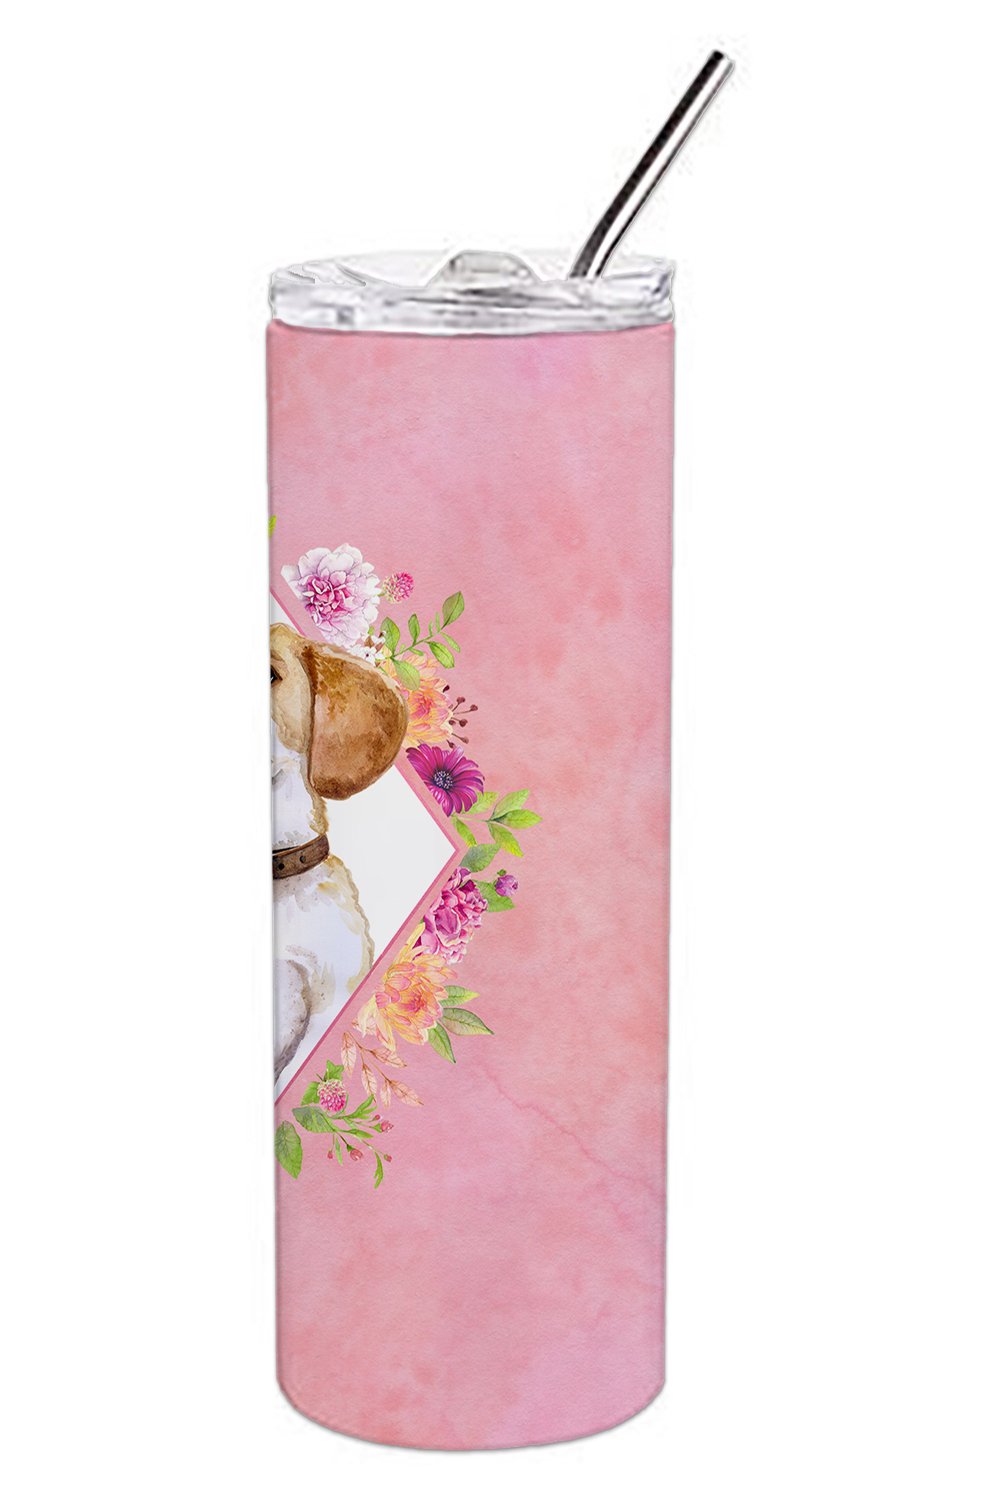 Beagle Pink Flowers Double Walled Stainless Steel 20 oz Skinny Tumbler CK4117TBL20 by Caroline's Treasures